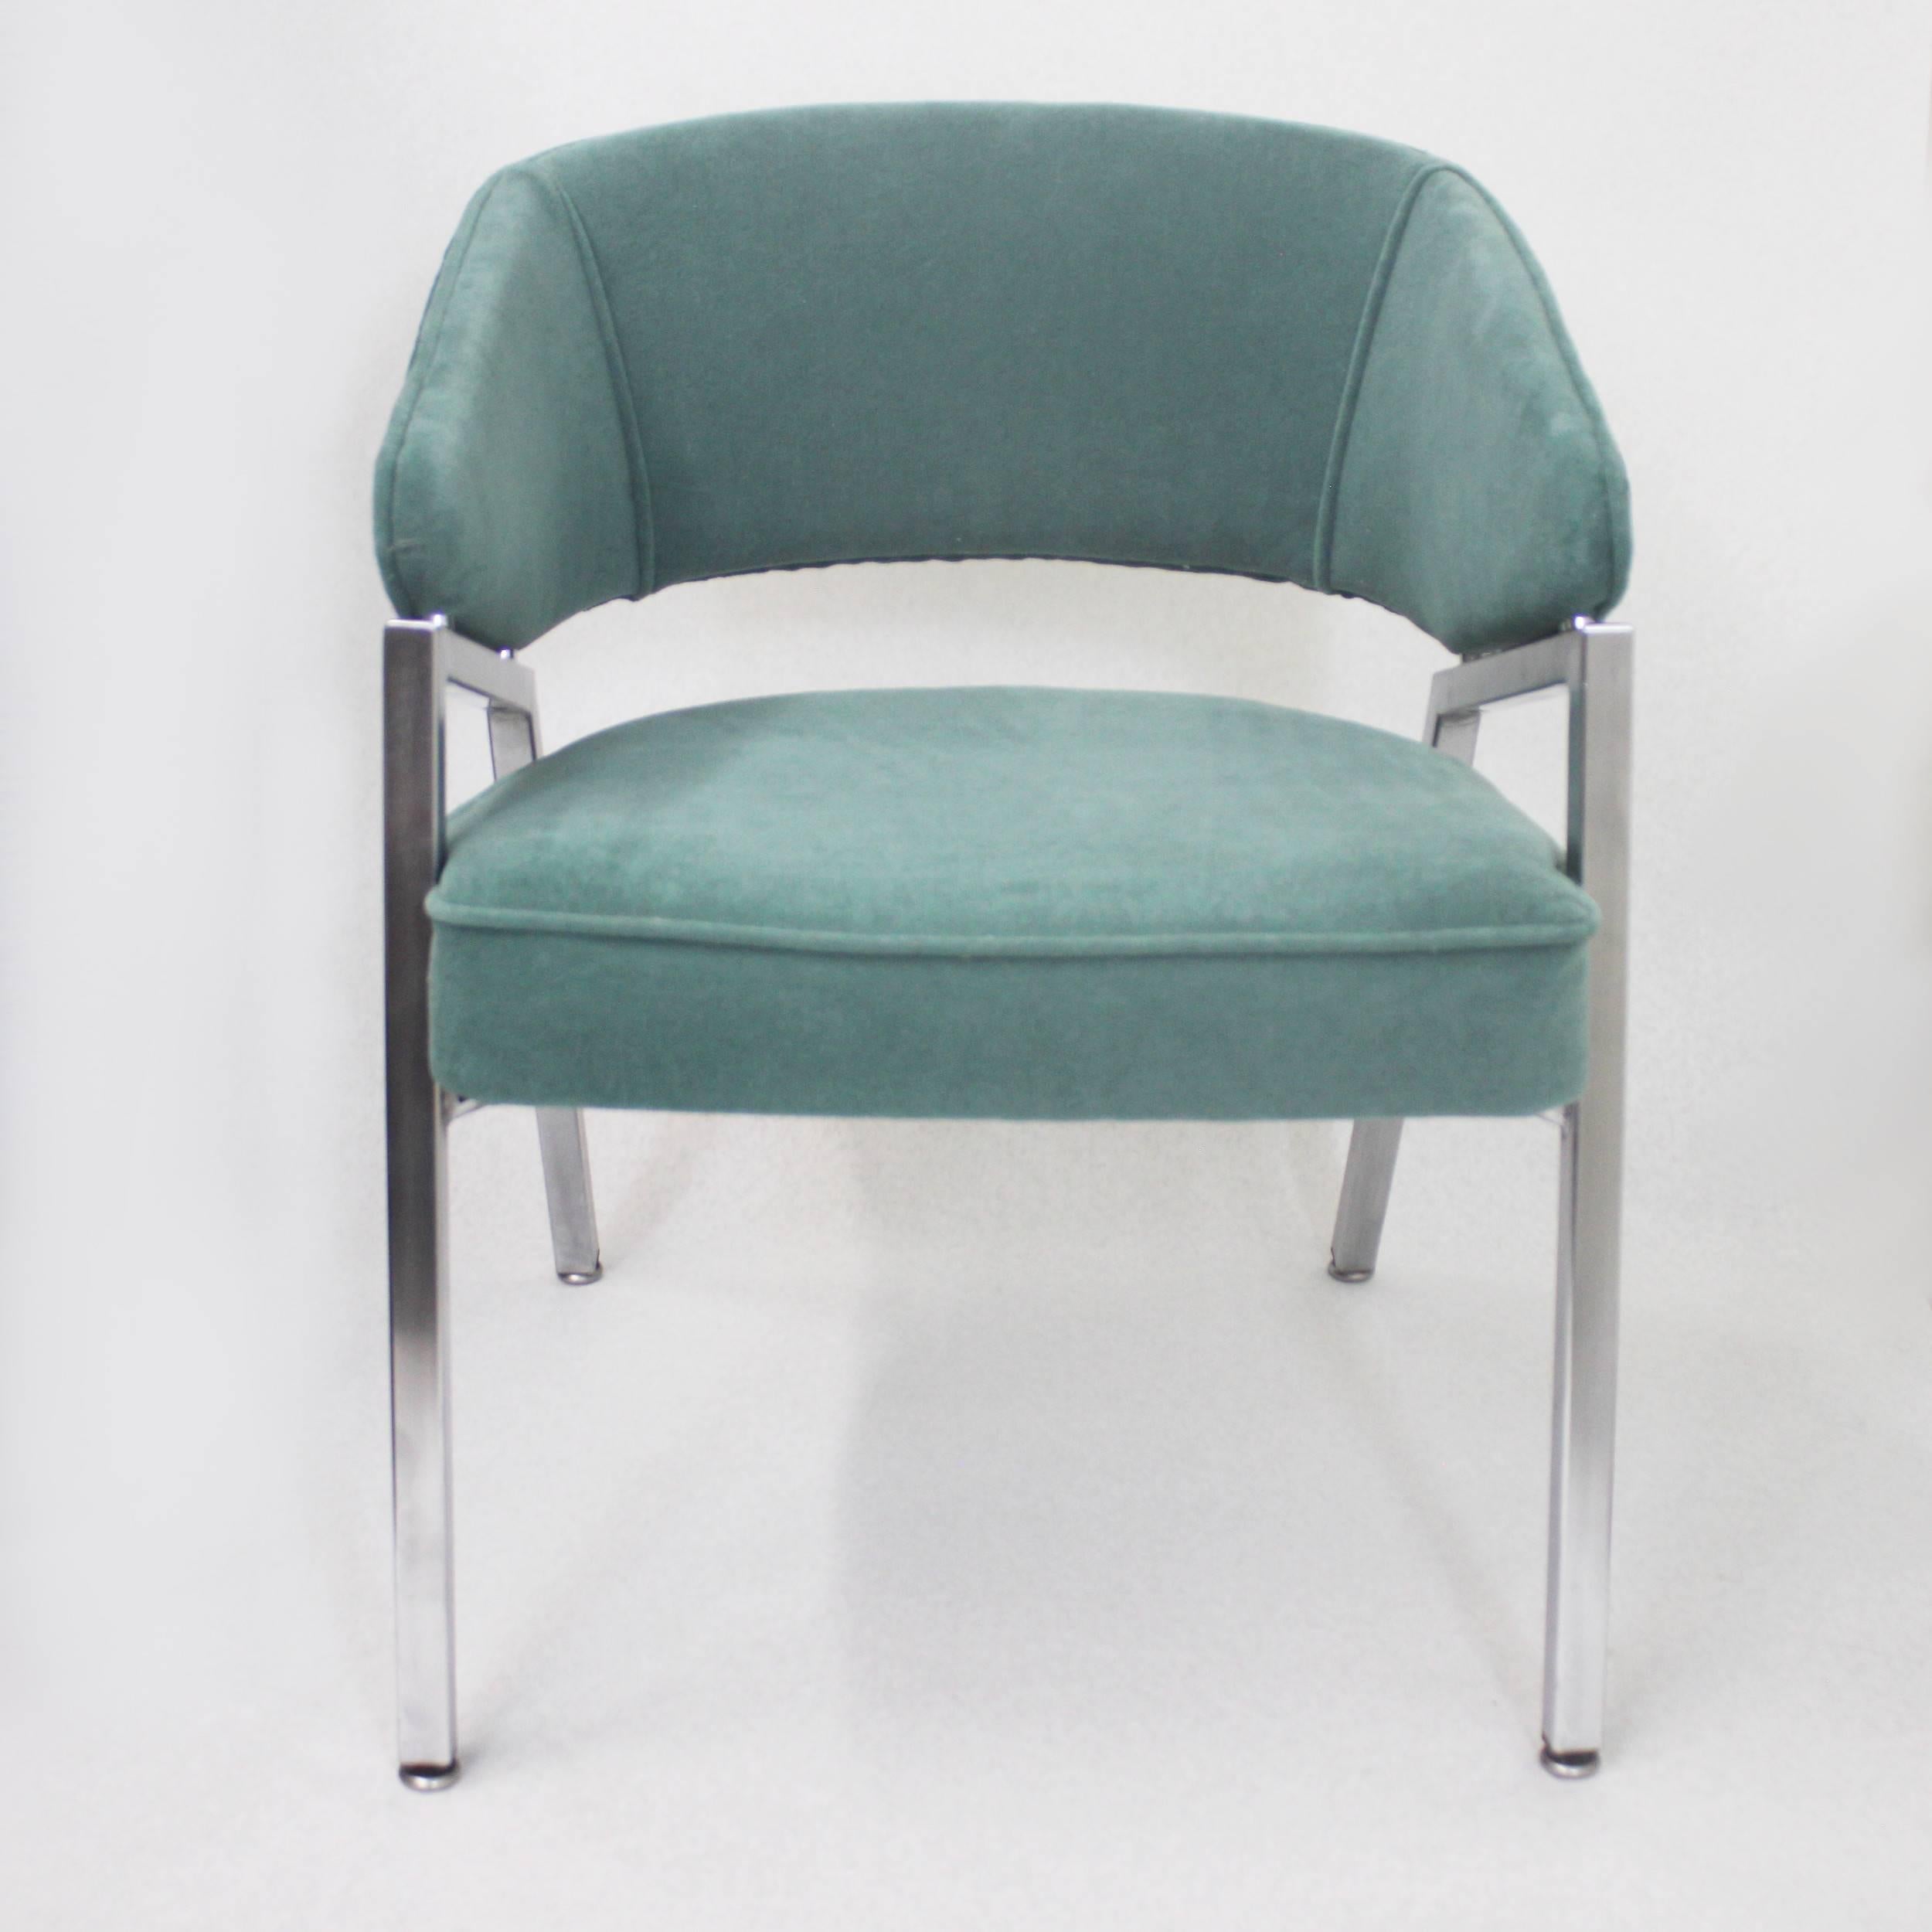 Rare Pair of 1970s Mid-Century Modern Teal Green and Chrome Side Arm Chairs 3